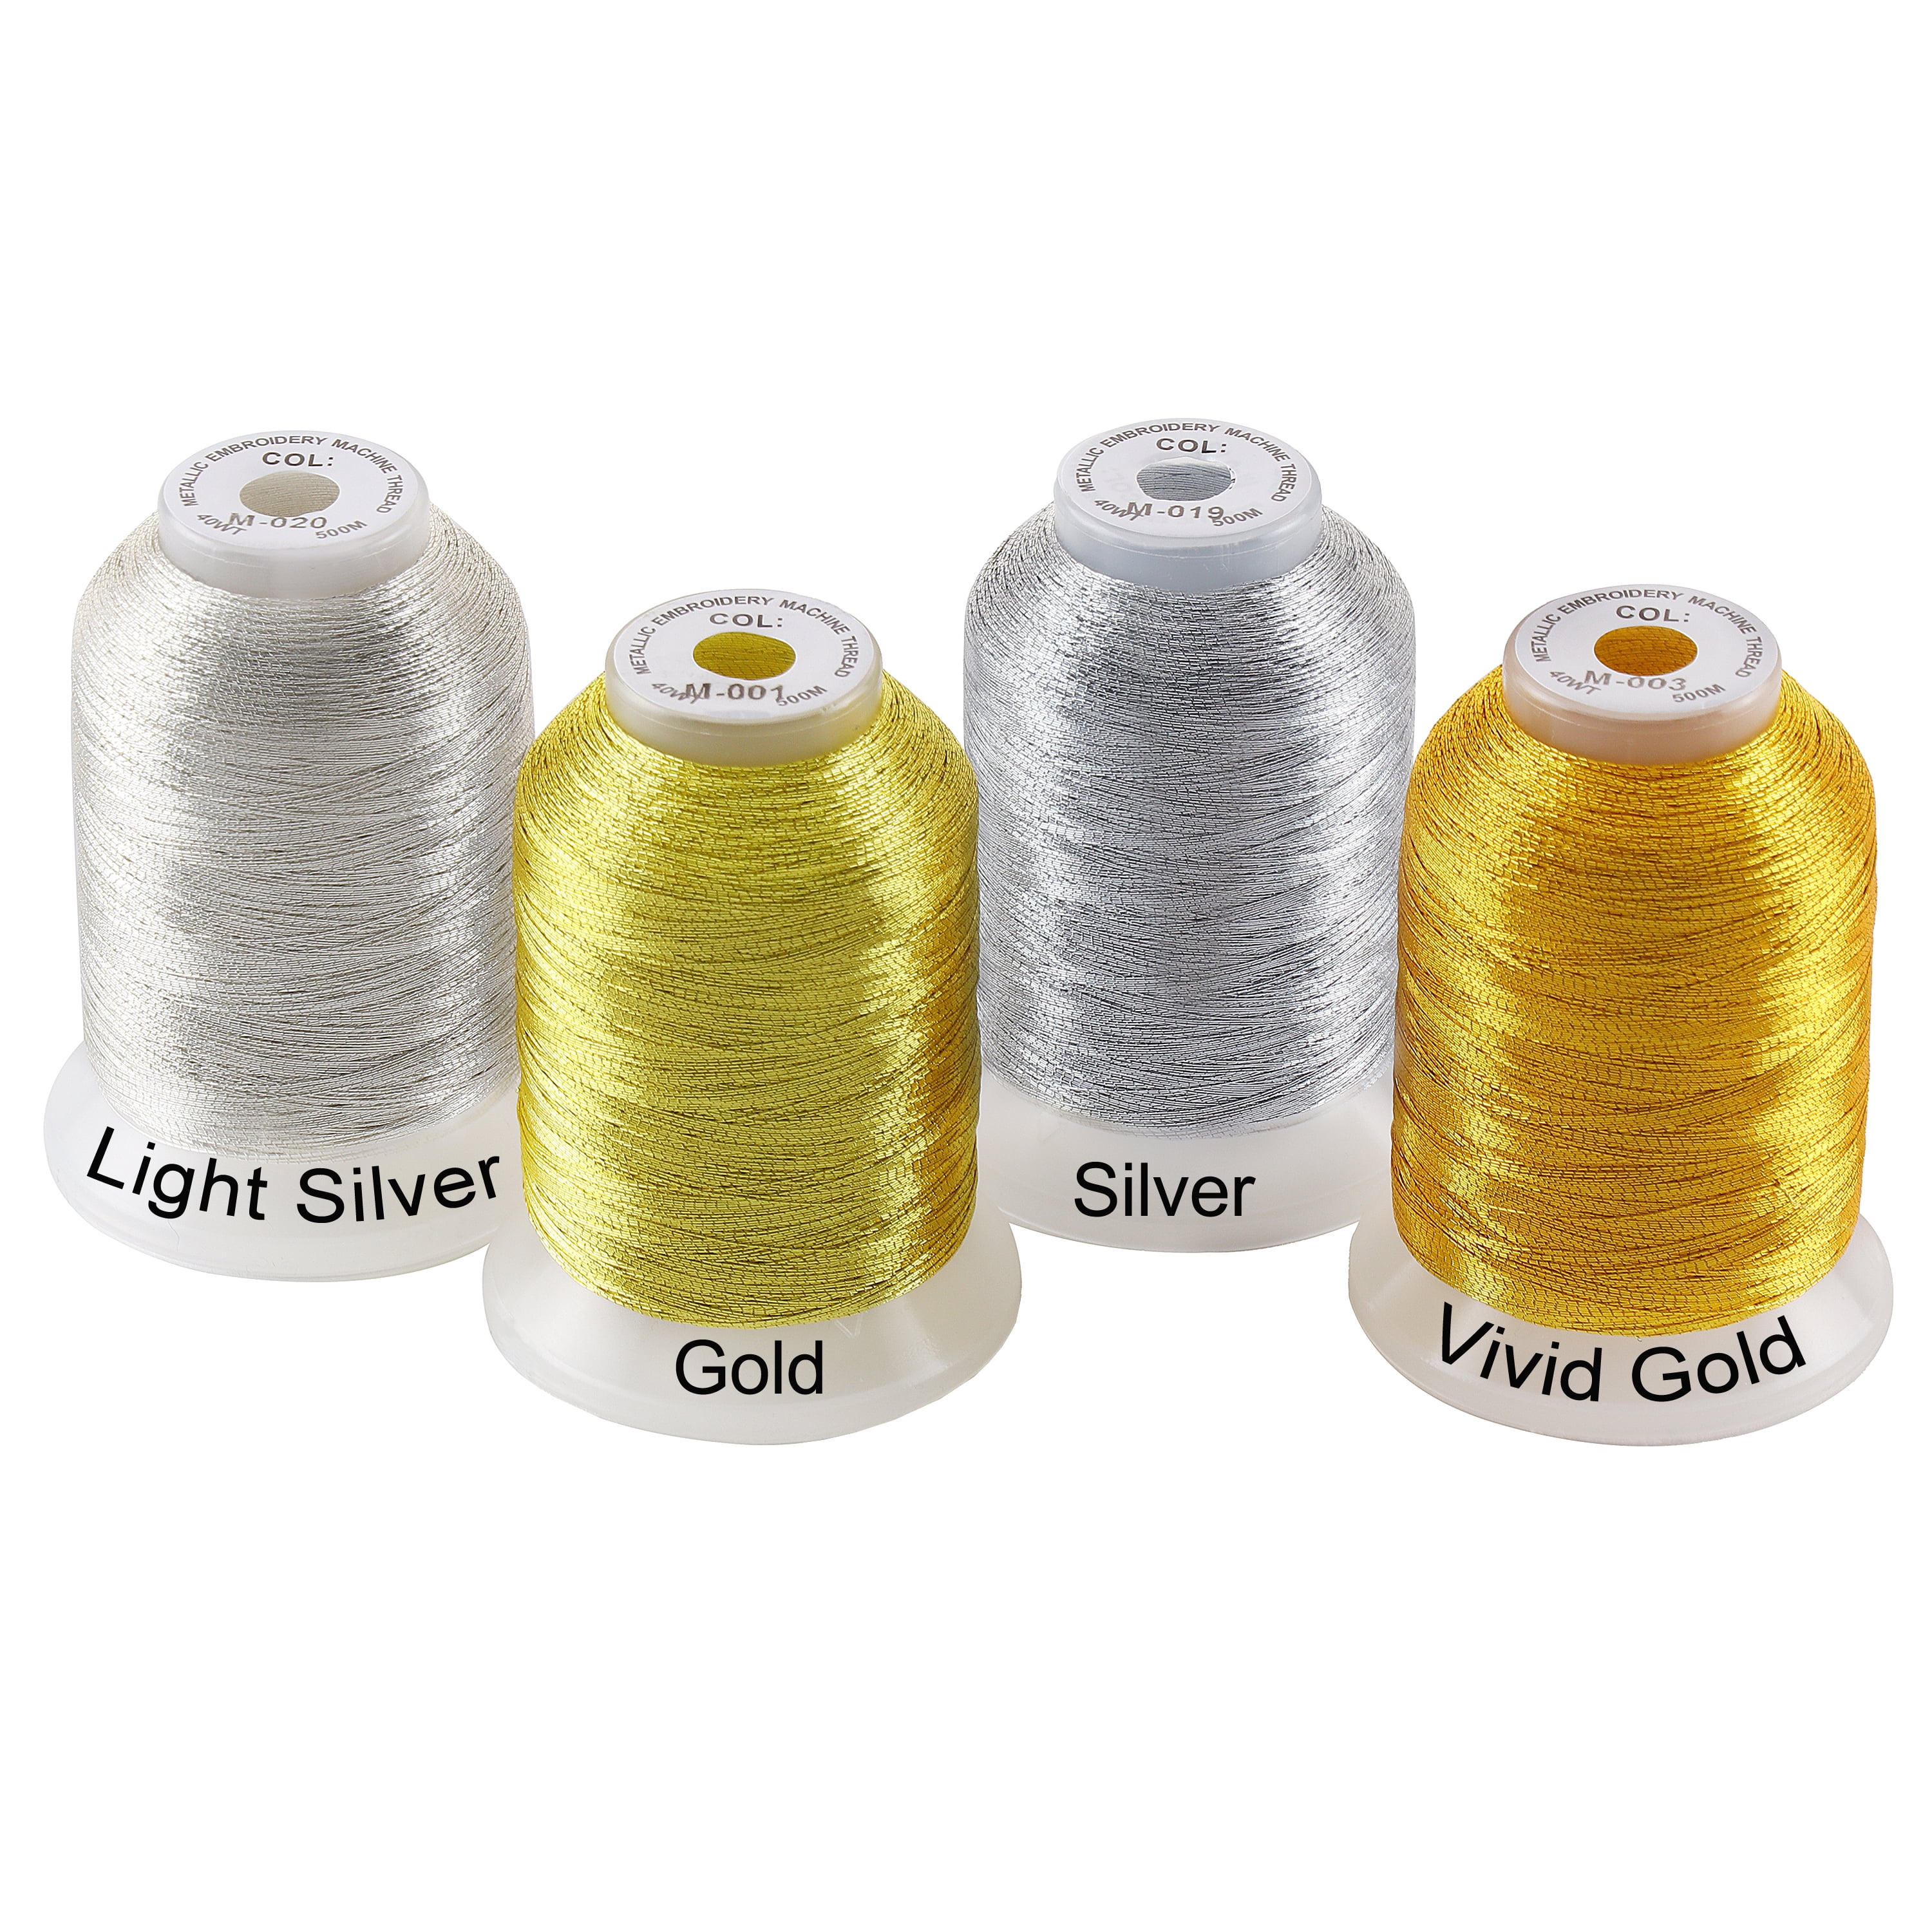 New brothread 4pcs (2 Gold+2 Silver Colors) Metallic Embroidery Machine  Thread Kit 500M (550Y) Each Spool for Computerized Embroidery and  Decorative Sewing 